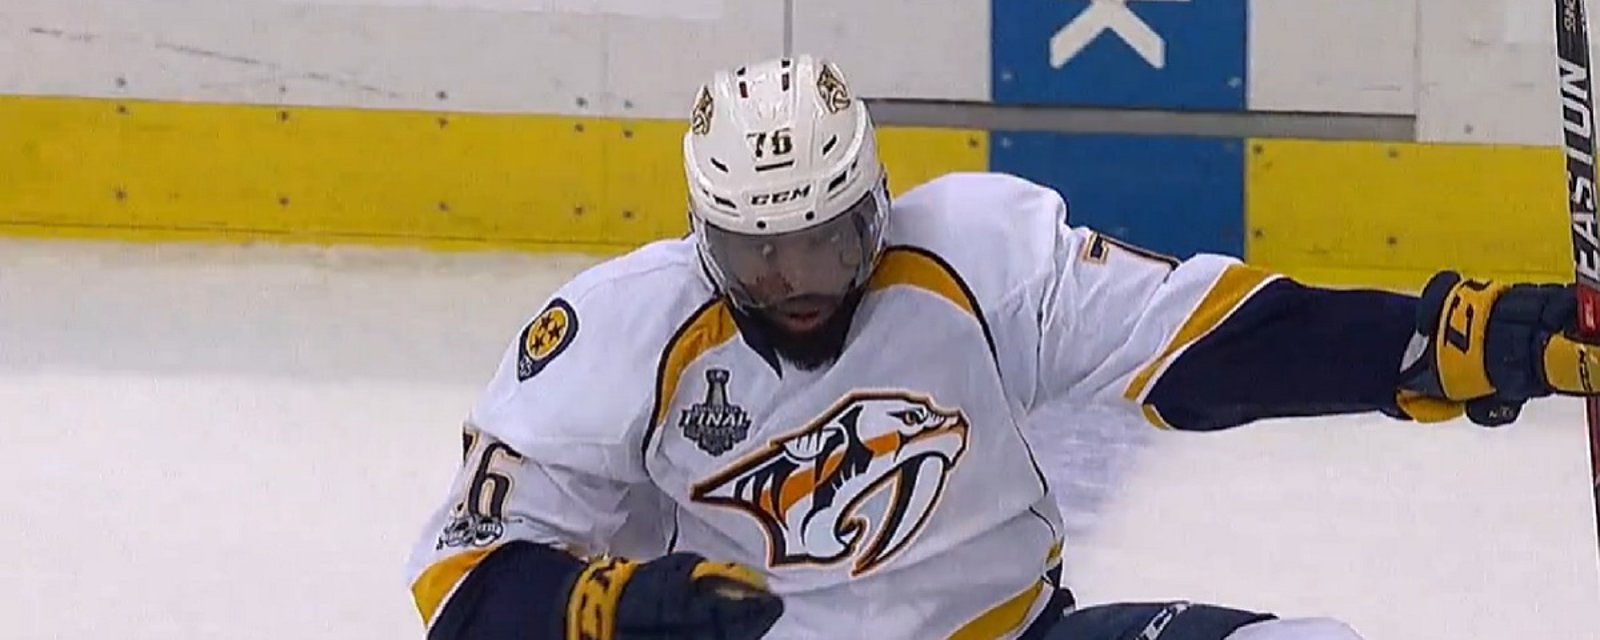 Subban believes he has scored, but after a long review the officials reverse the call!